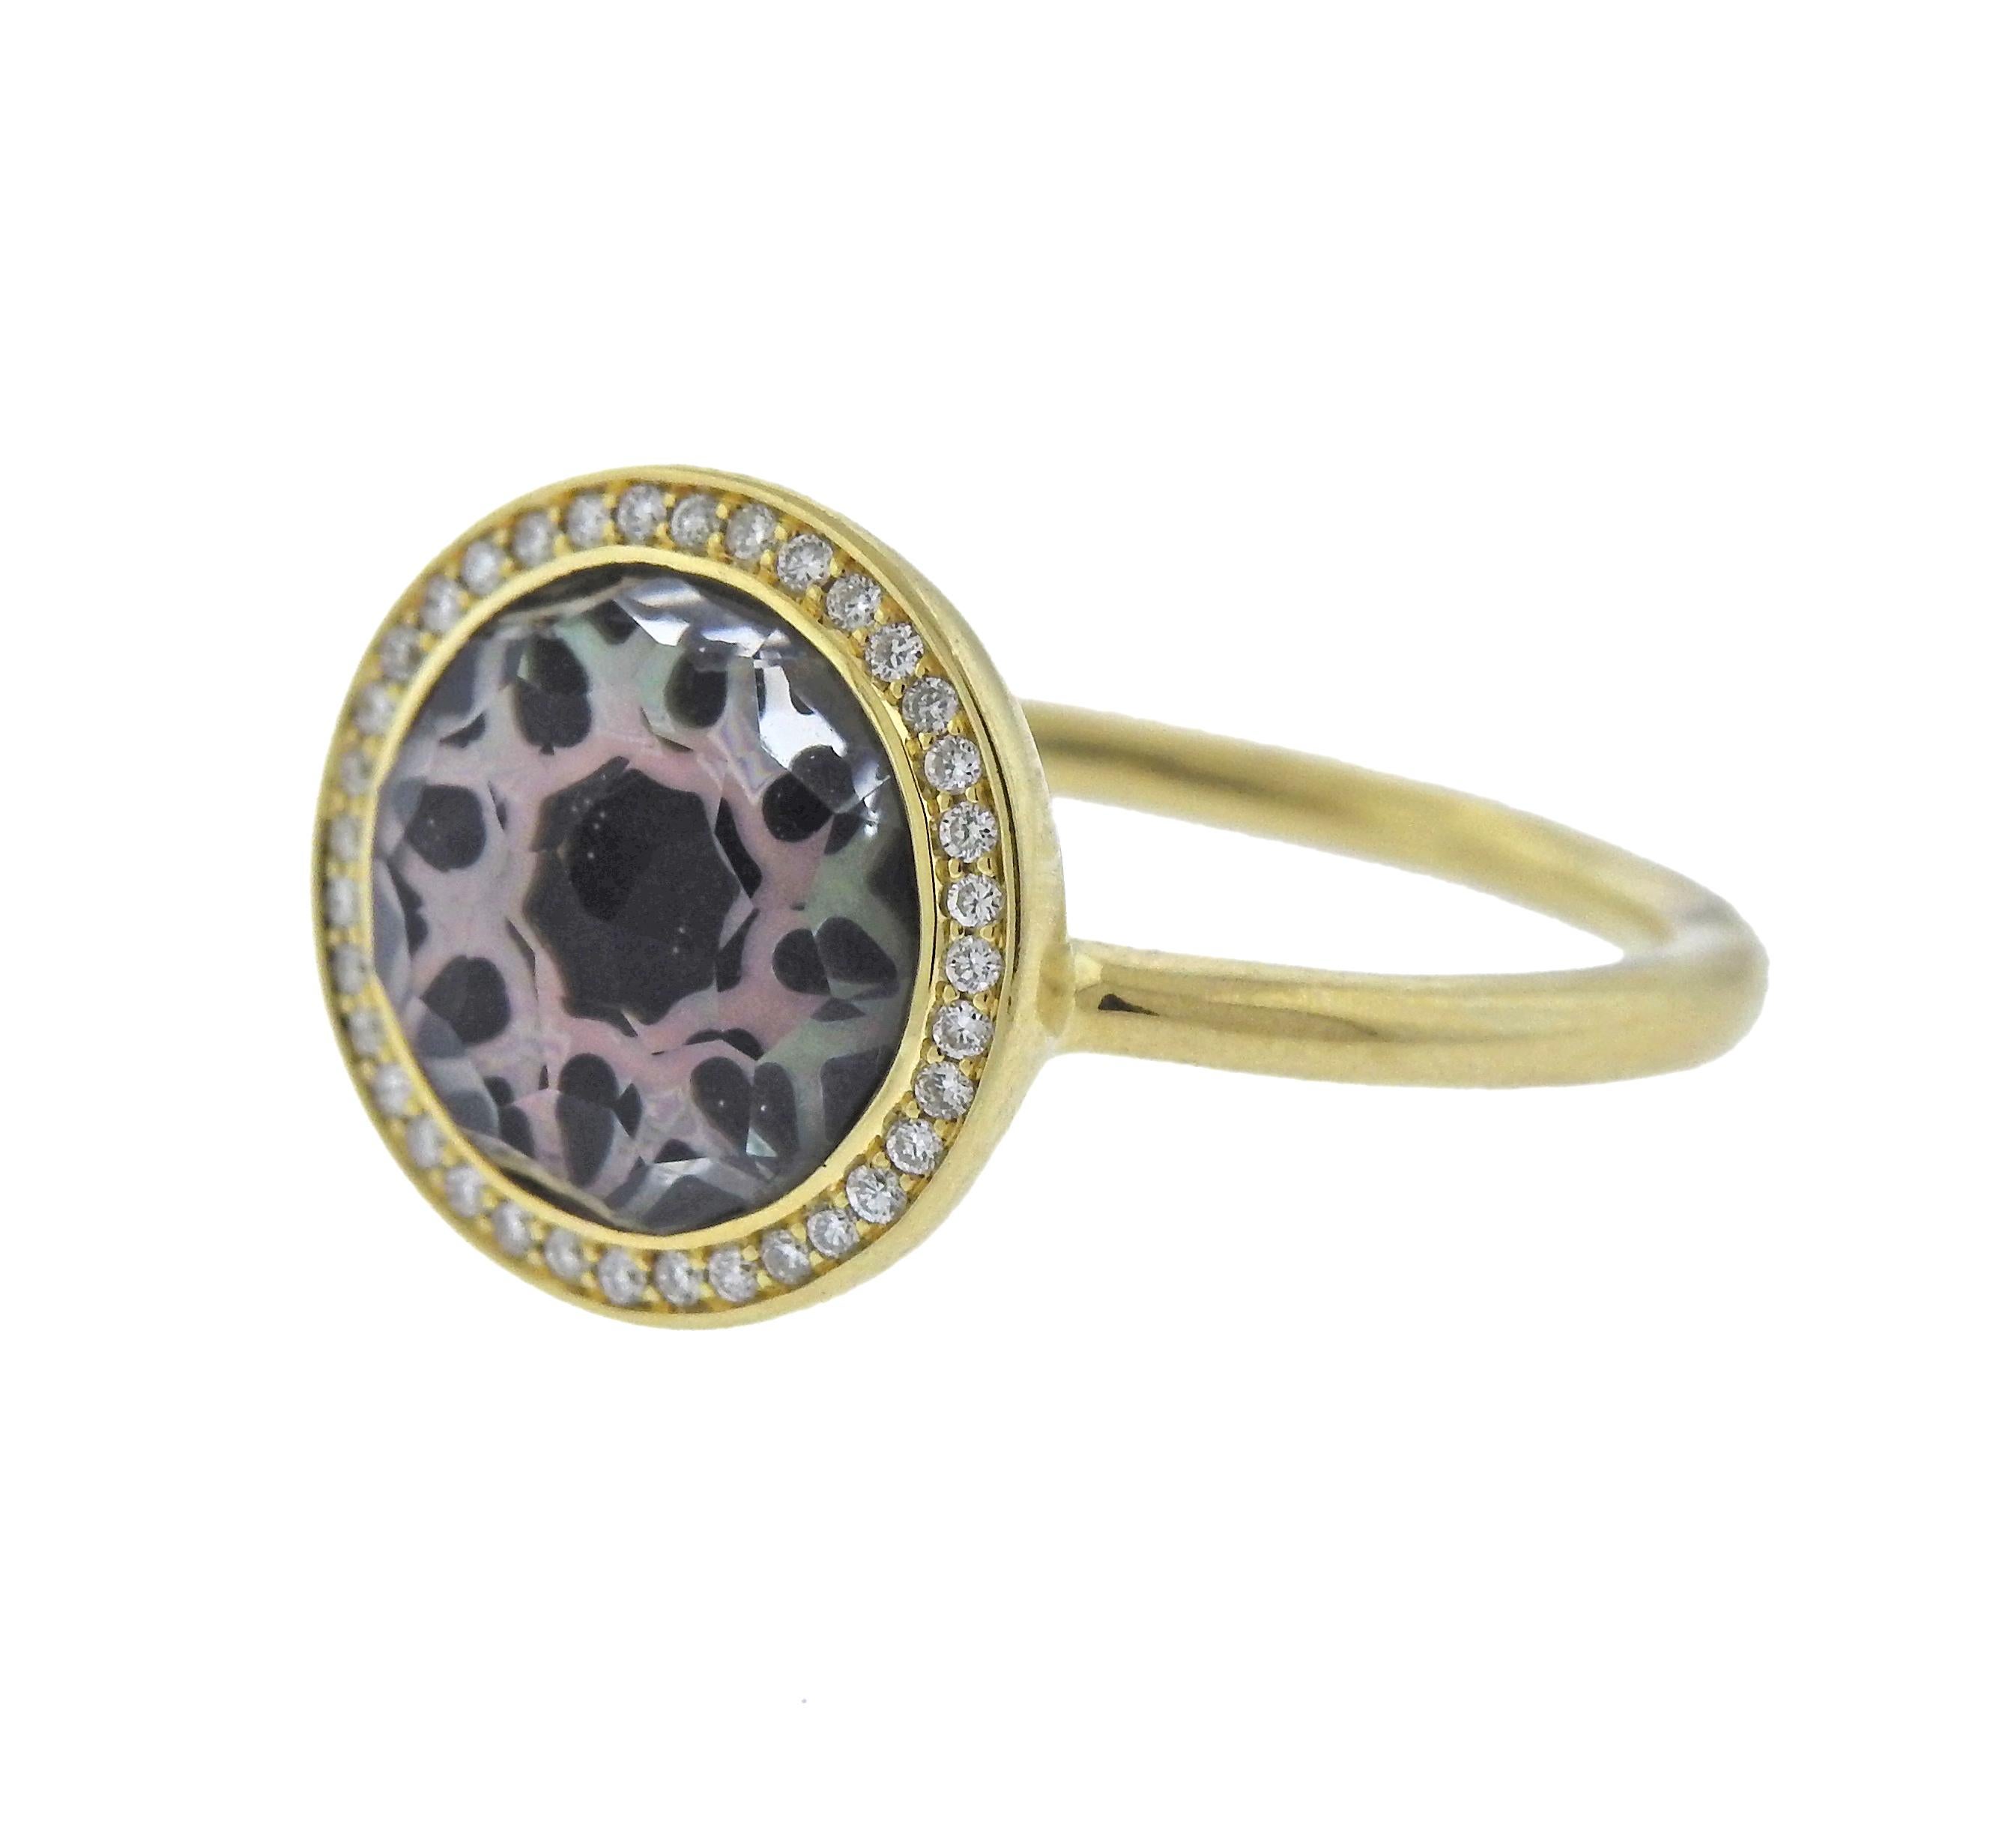 18k gold ring by Ippolita, set with shell and crystal, surrounded with approx. 0.16ctw in diamonds. Ring size 7, top is 13mm in diameter, weighs 4.3 grms. Marked Ippolita and 18k.  Retail $1995. Come with Pouch.